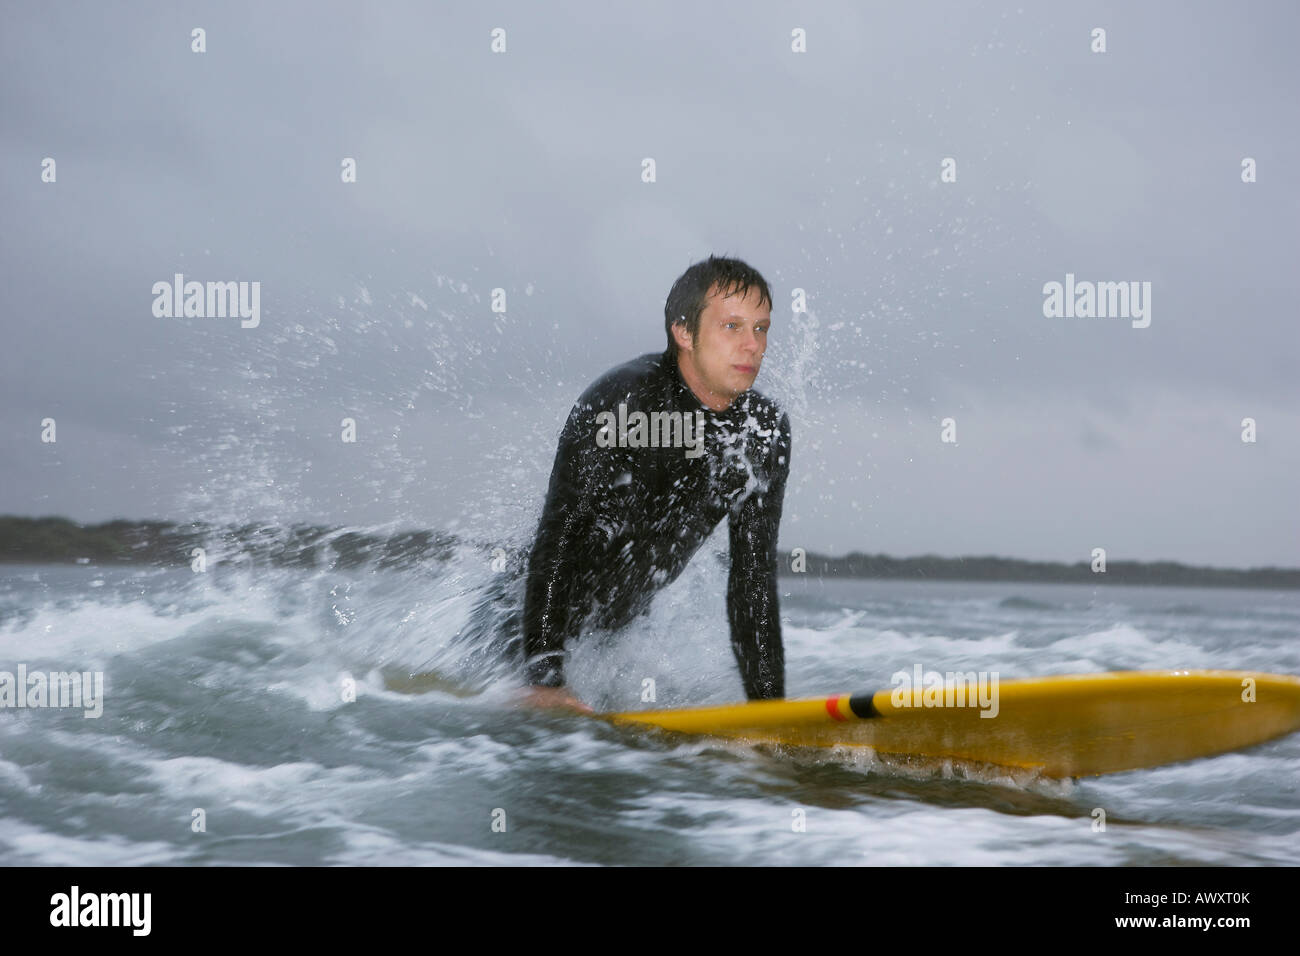 Surfer pulling himself up onto surfboard in water Stock Photo